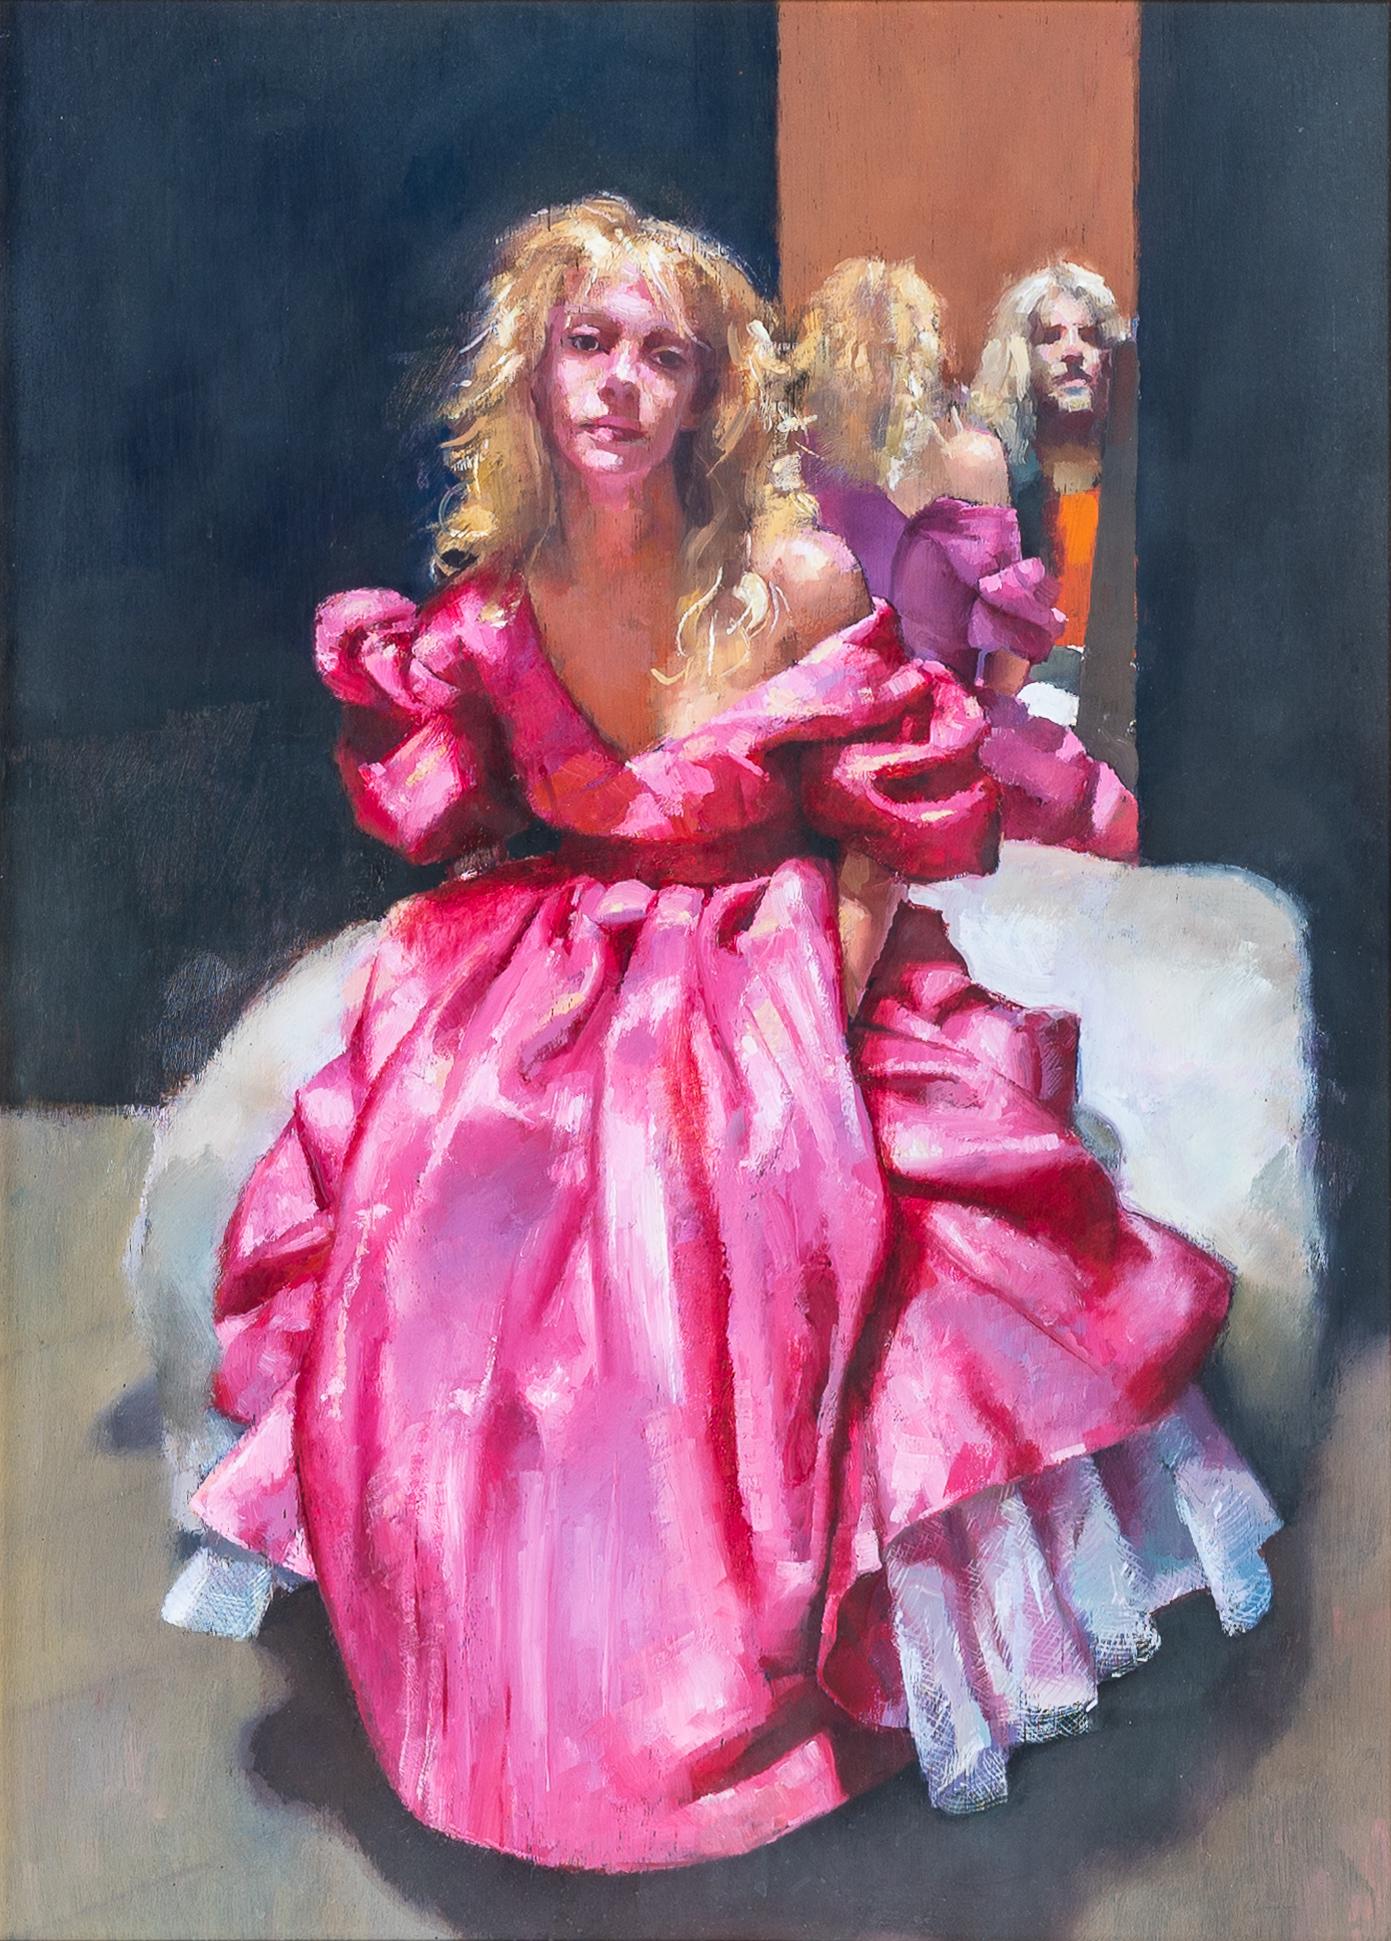 'Painter with Pati' Figurative painting, man & woman wearing a pink ball gown - Painting by Robert Lenkiewicz 